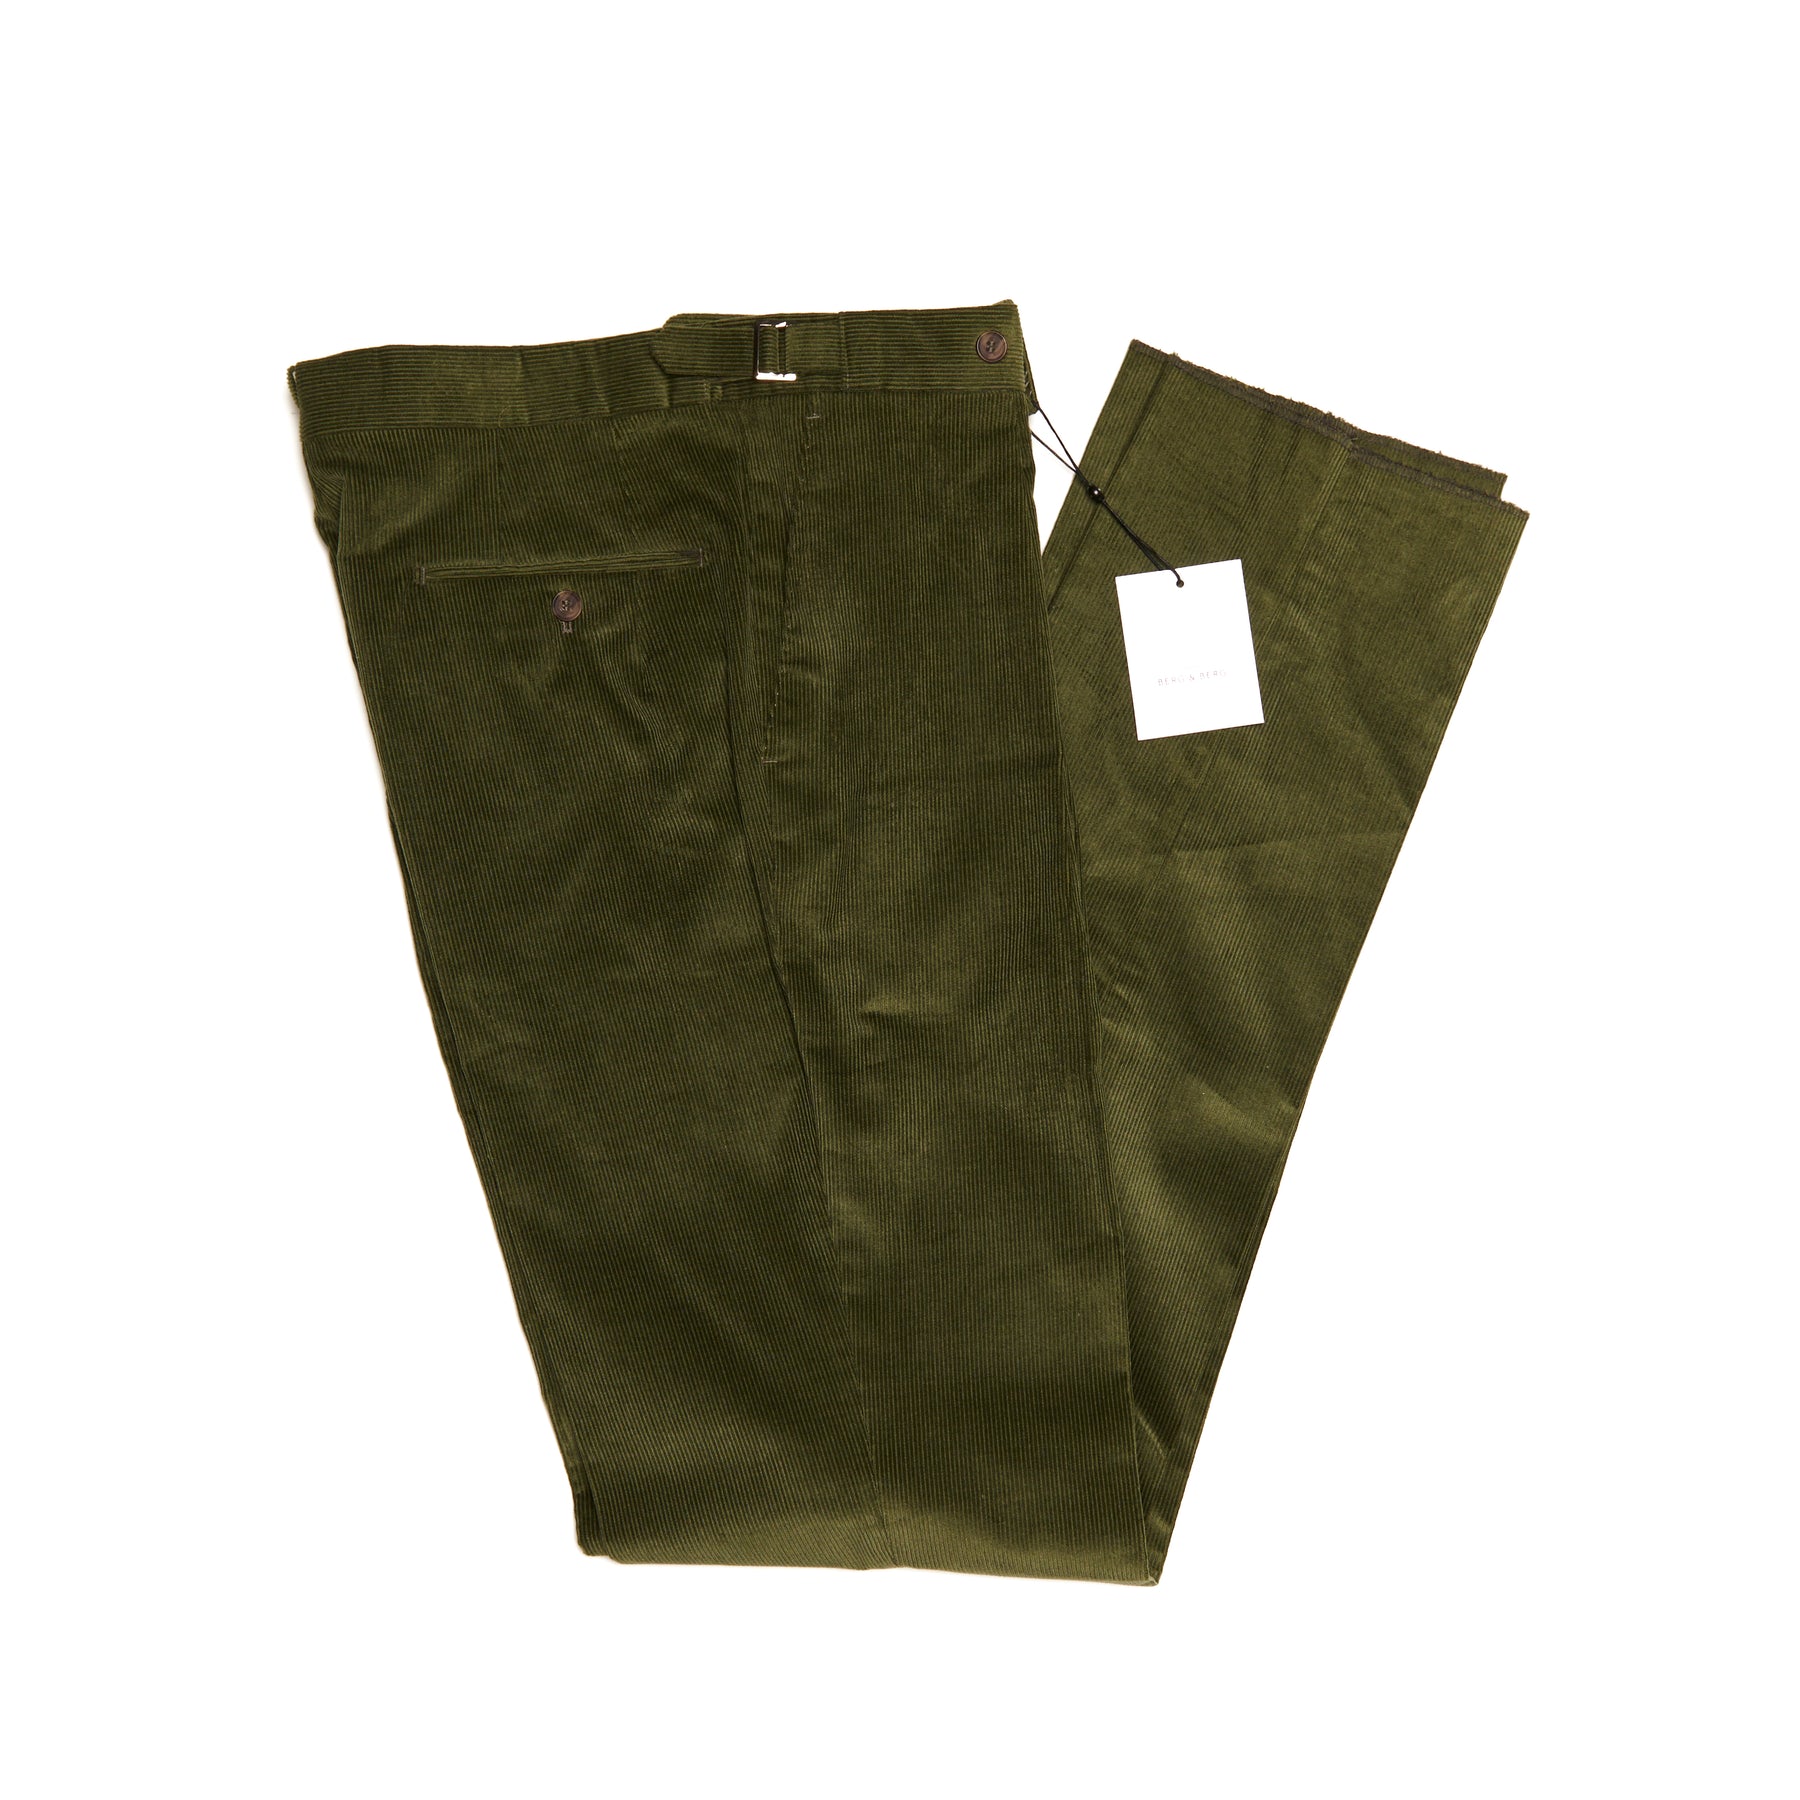 Green colour ideas with trousers blouse  Outfits With Corduroy Pants  Corduroy  Pant Outfits green outfit Minimalist Fashion